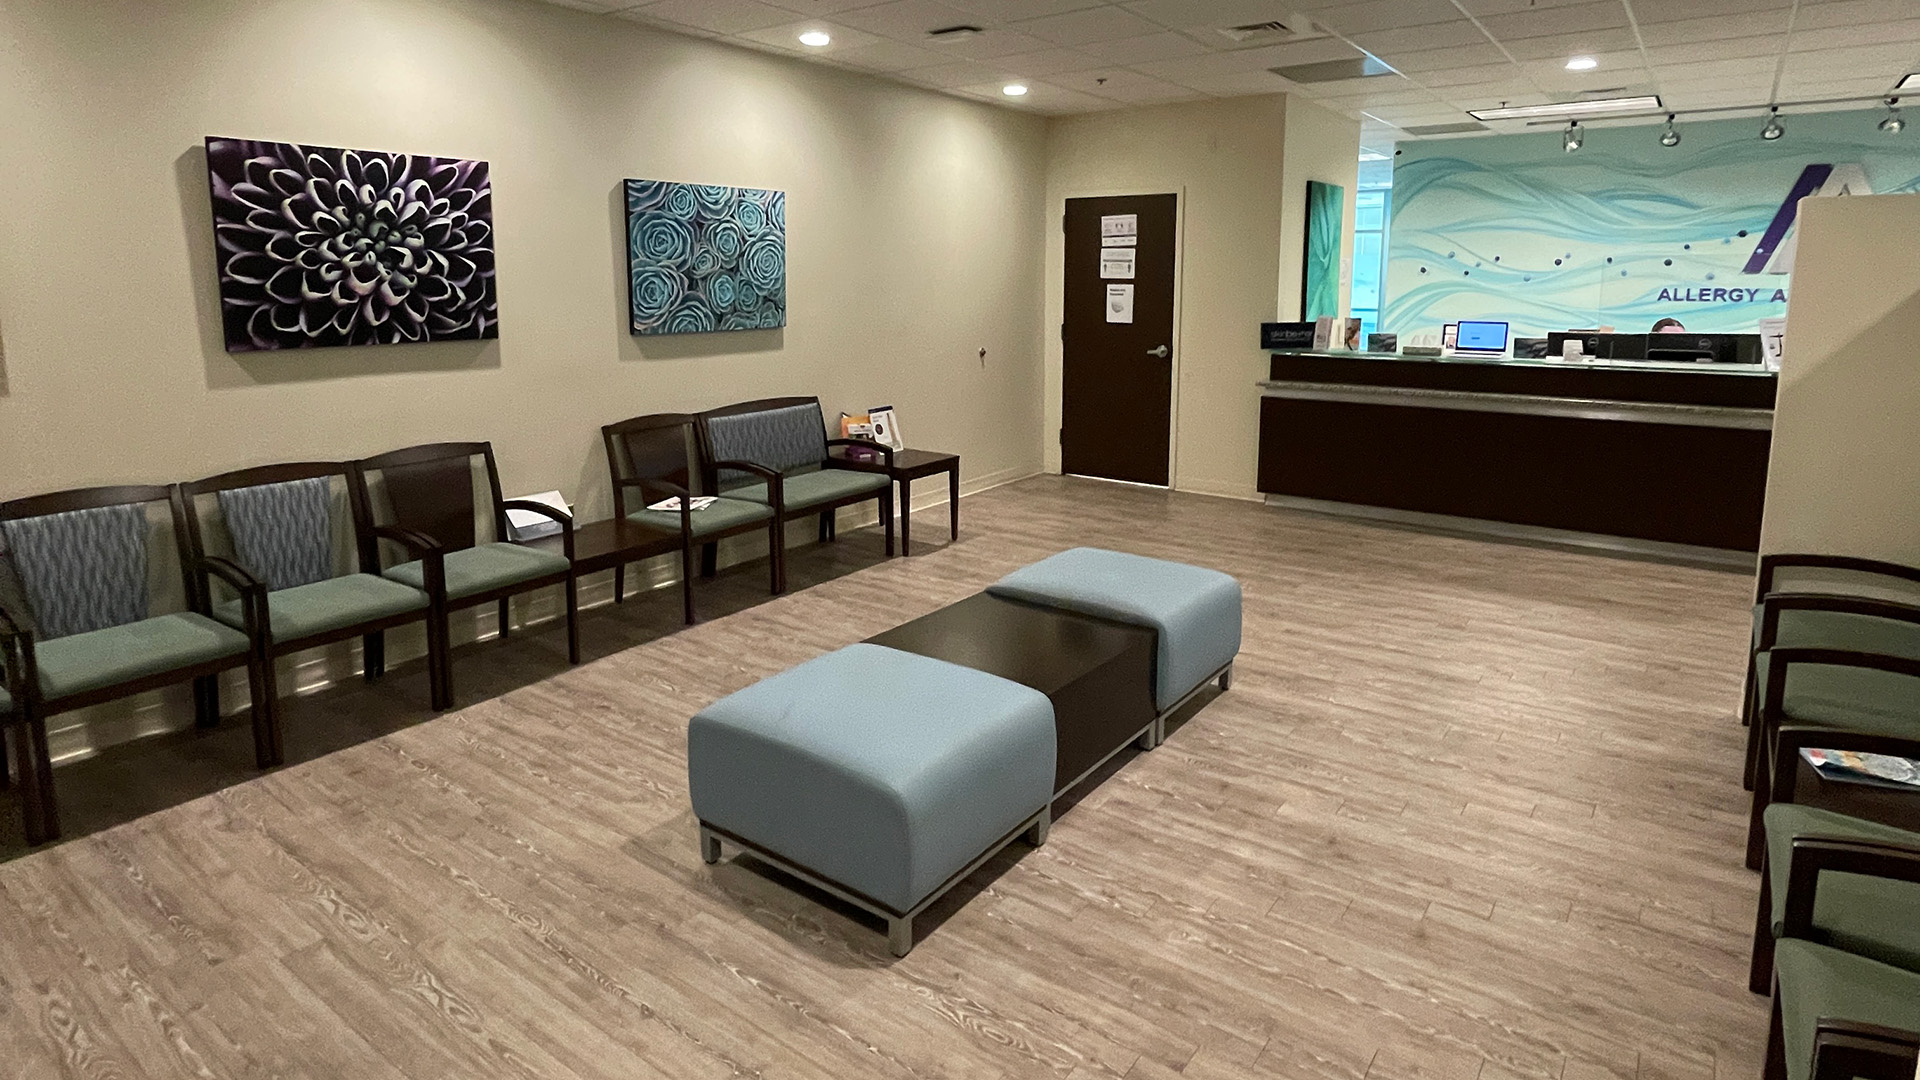 Image of suite lobby area